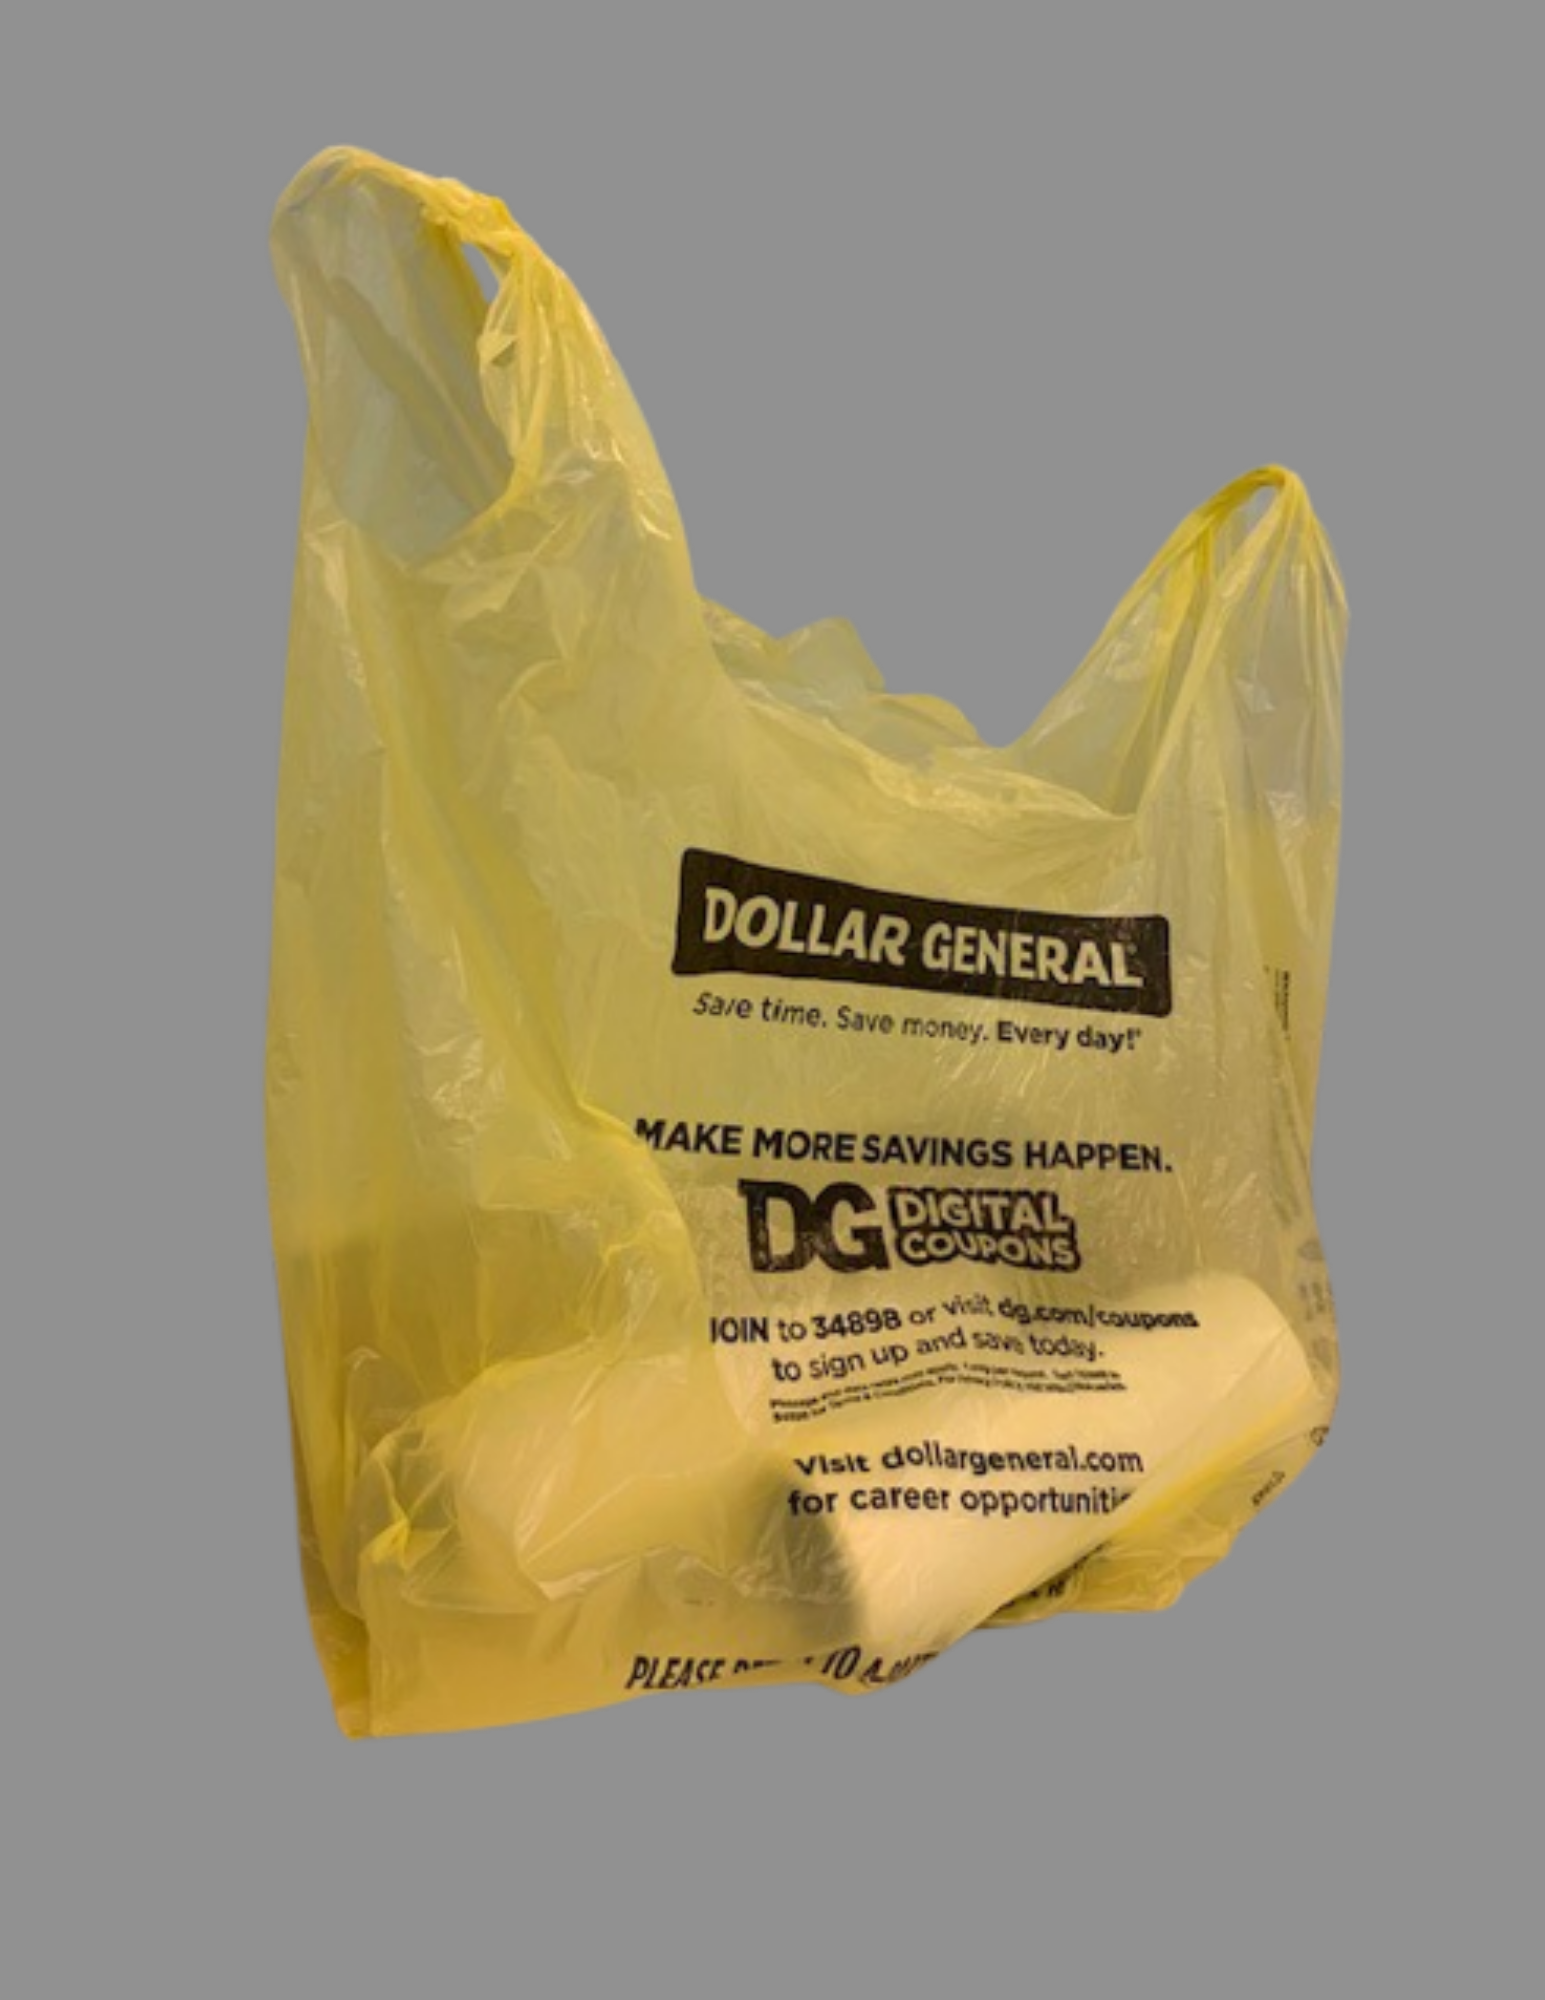 #BYOBagDE: How Delaware is making its second attempt at a ban on single-use plastic bags